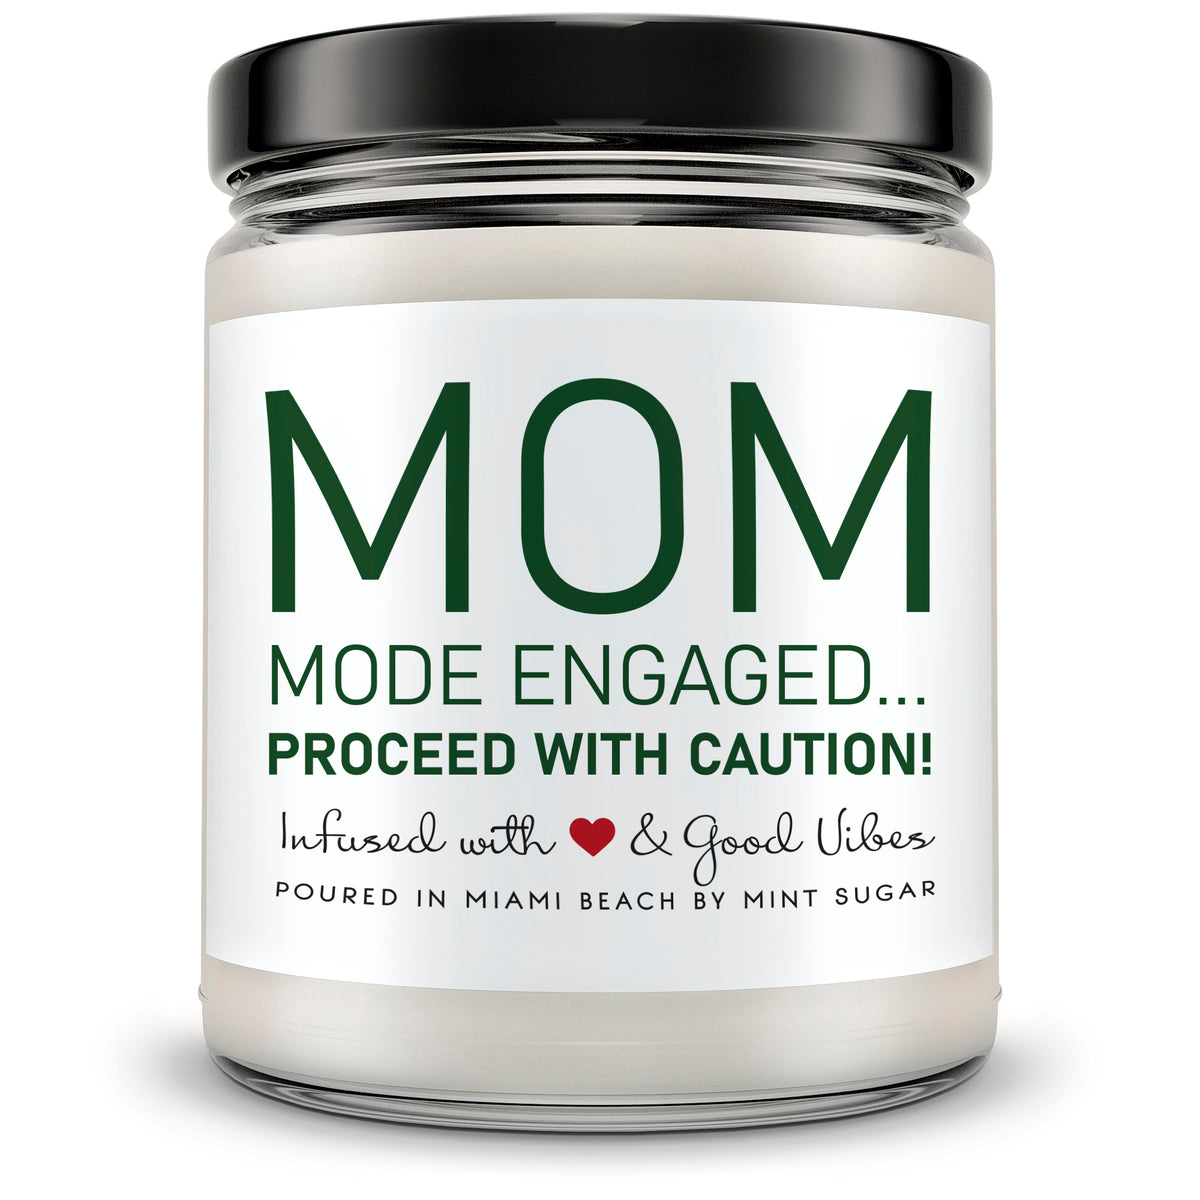 Mom Mode Engaged, Proceed With Caution - Mint Sugar Candle